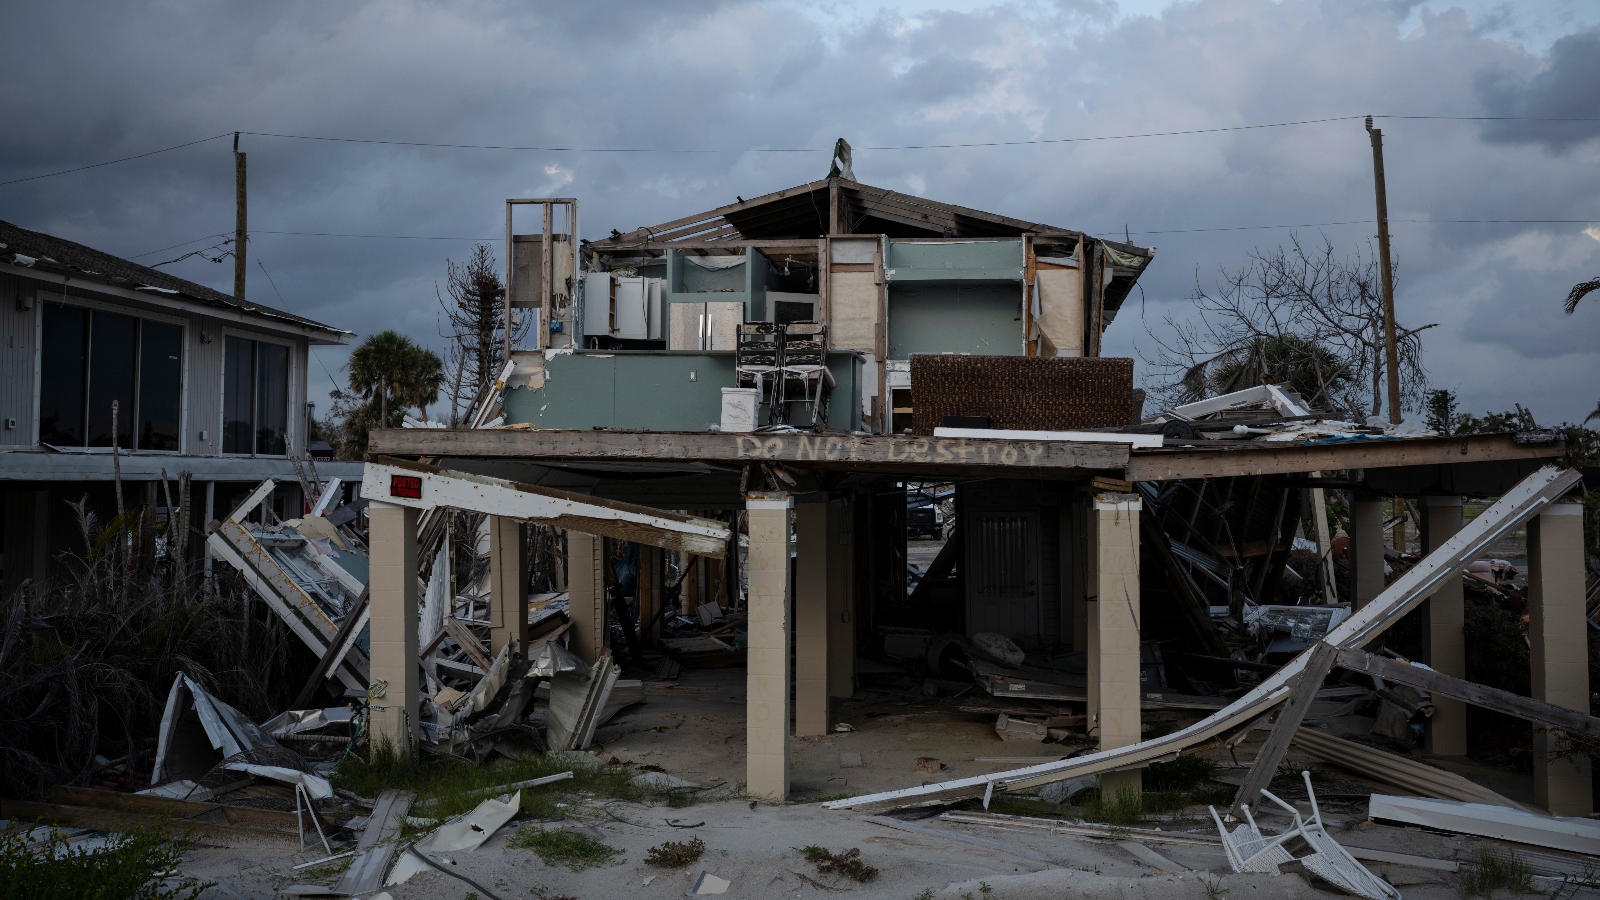 FEMA is making an example of this Florida boomtown. Locals call it ‘revenge politics.’